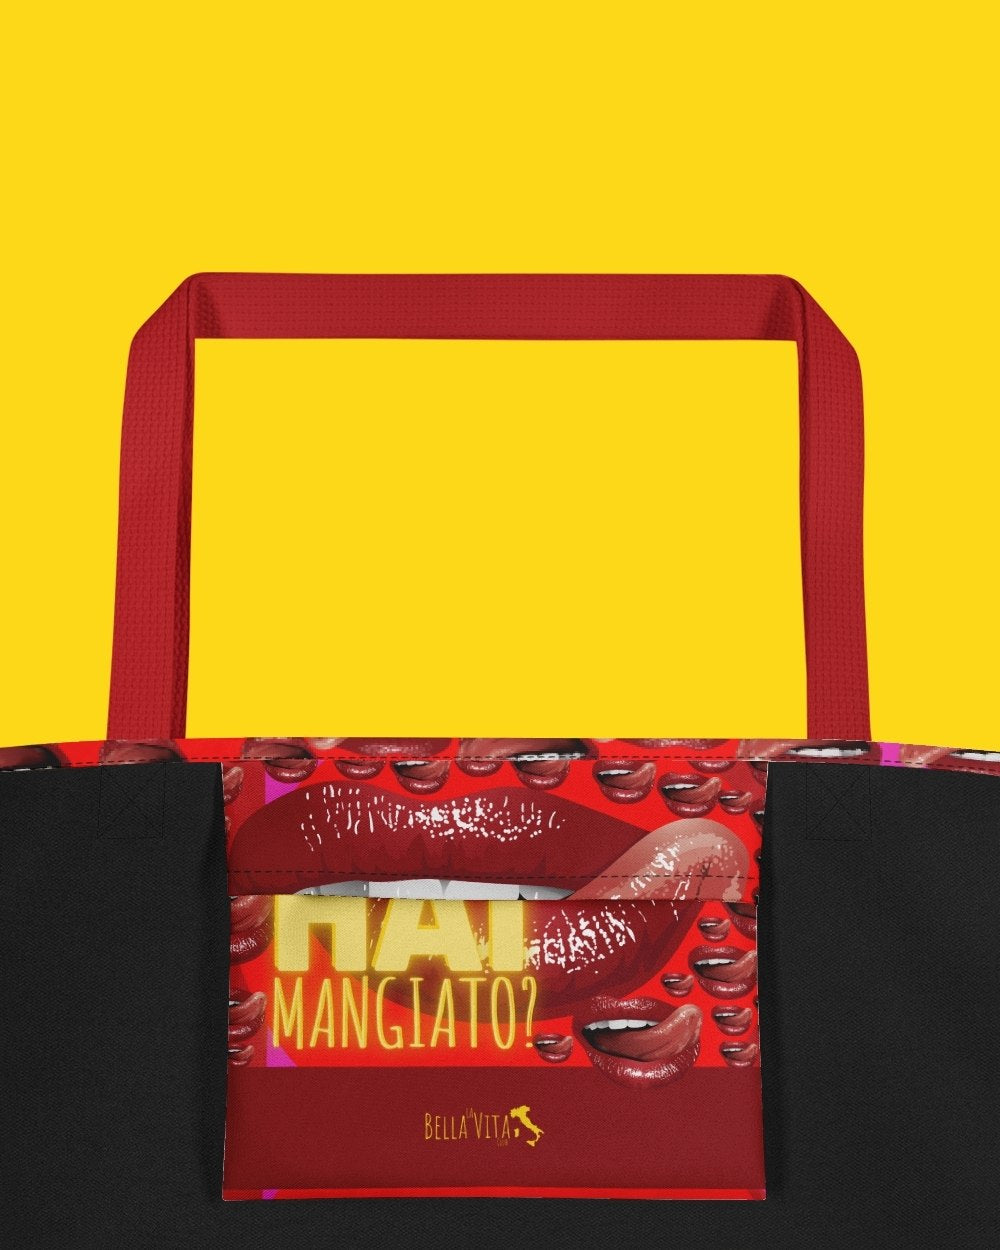 Our "Ho Mangiato" design has red as its main colour. On one side you see a laughing mouth with the question "Hai mangiato?", on the other side "ho mangiato", meaning "Have you eaten?" and "I have eaten". 